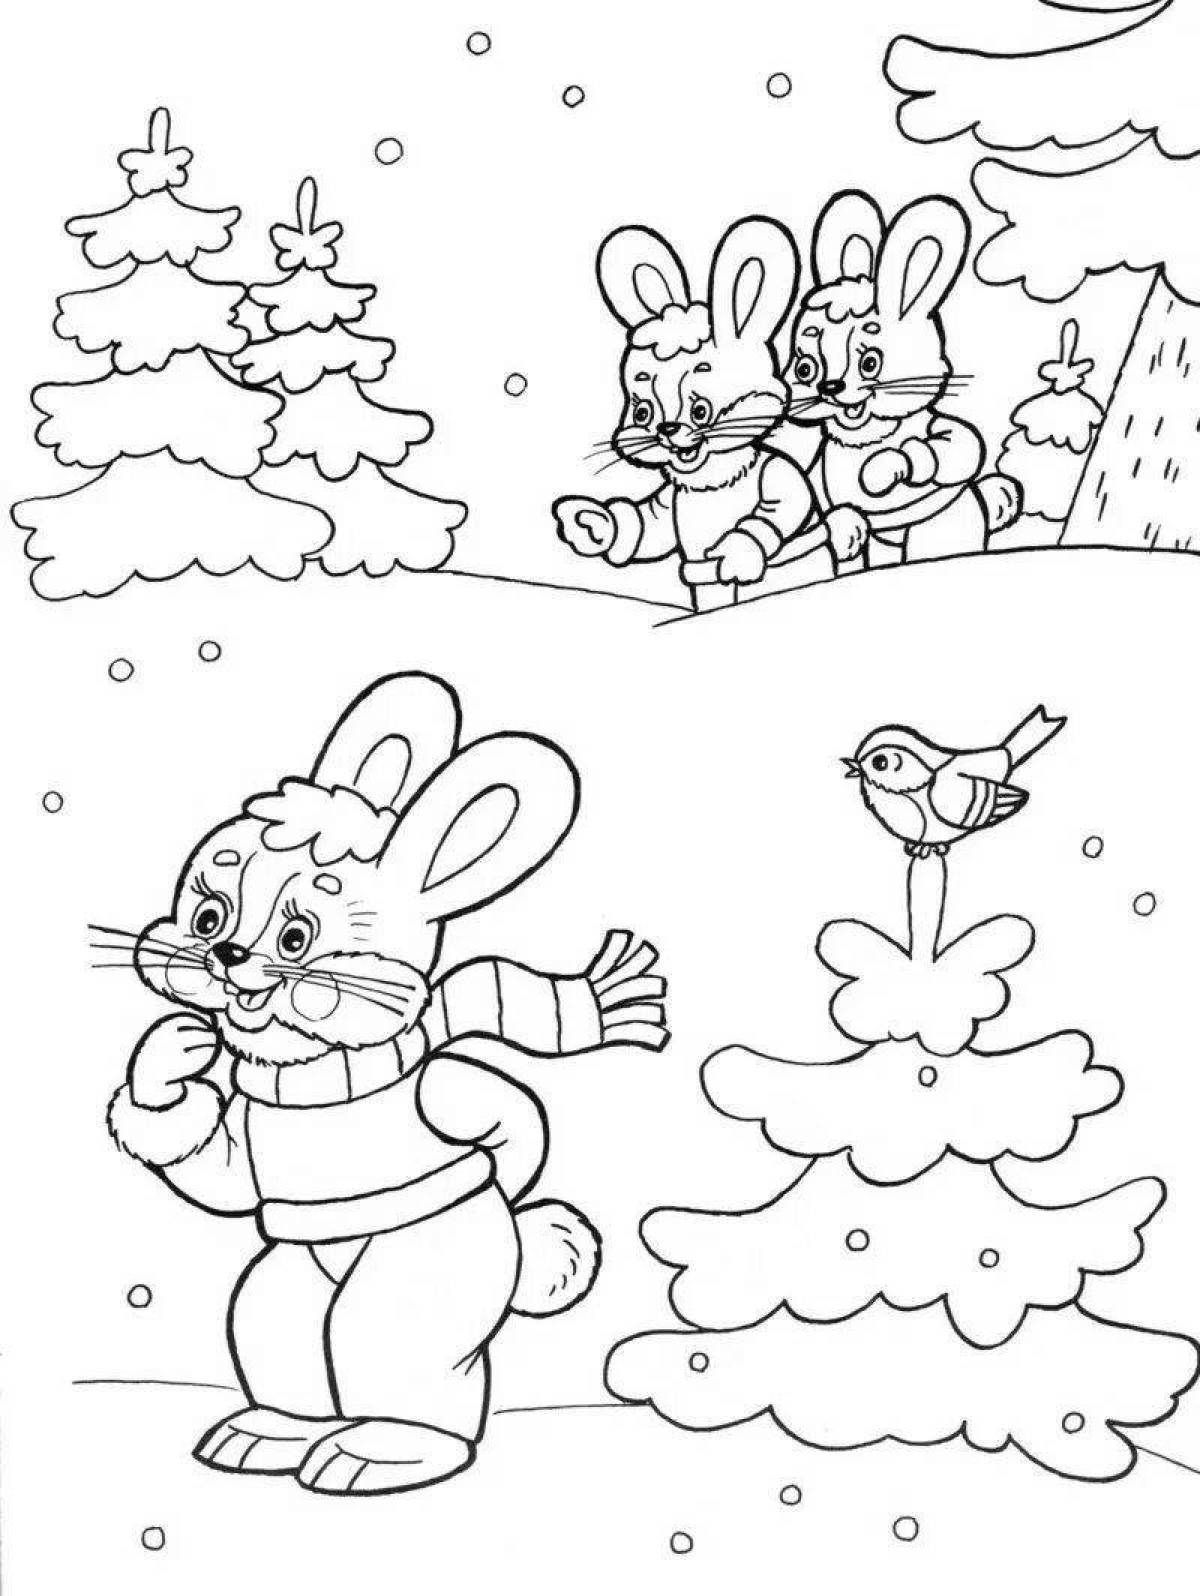 Wonderful winter coloring book for 3 year olds